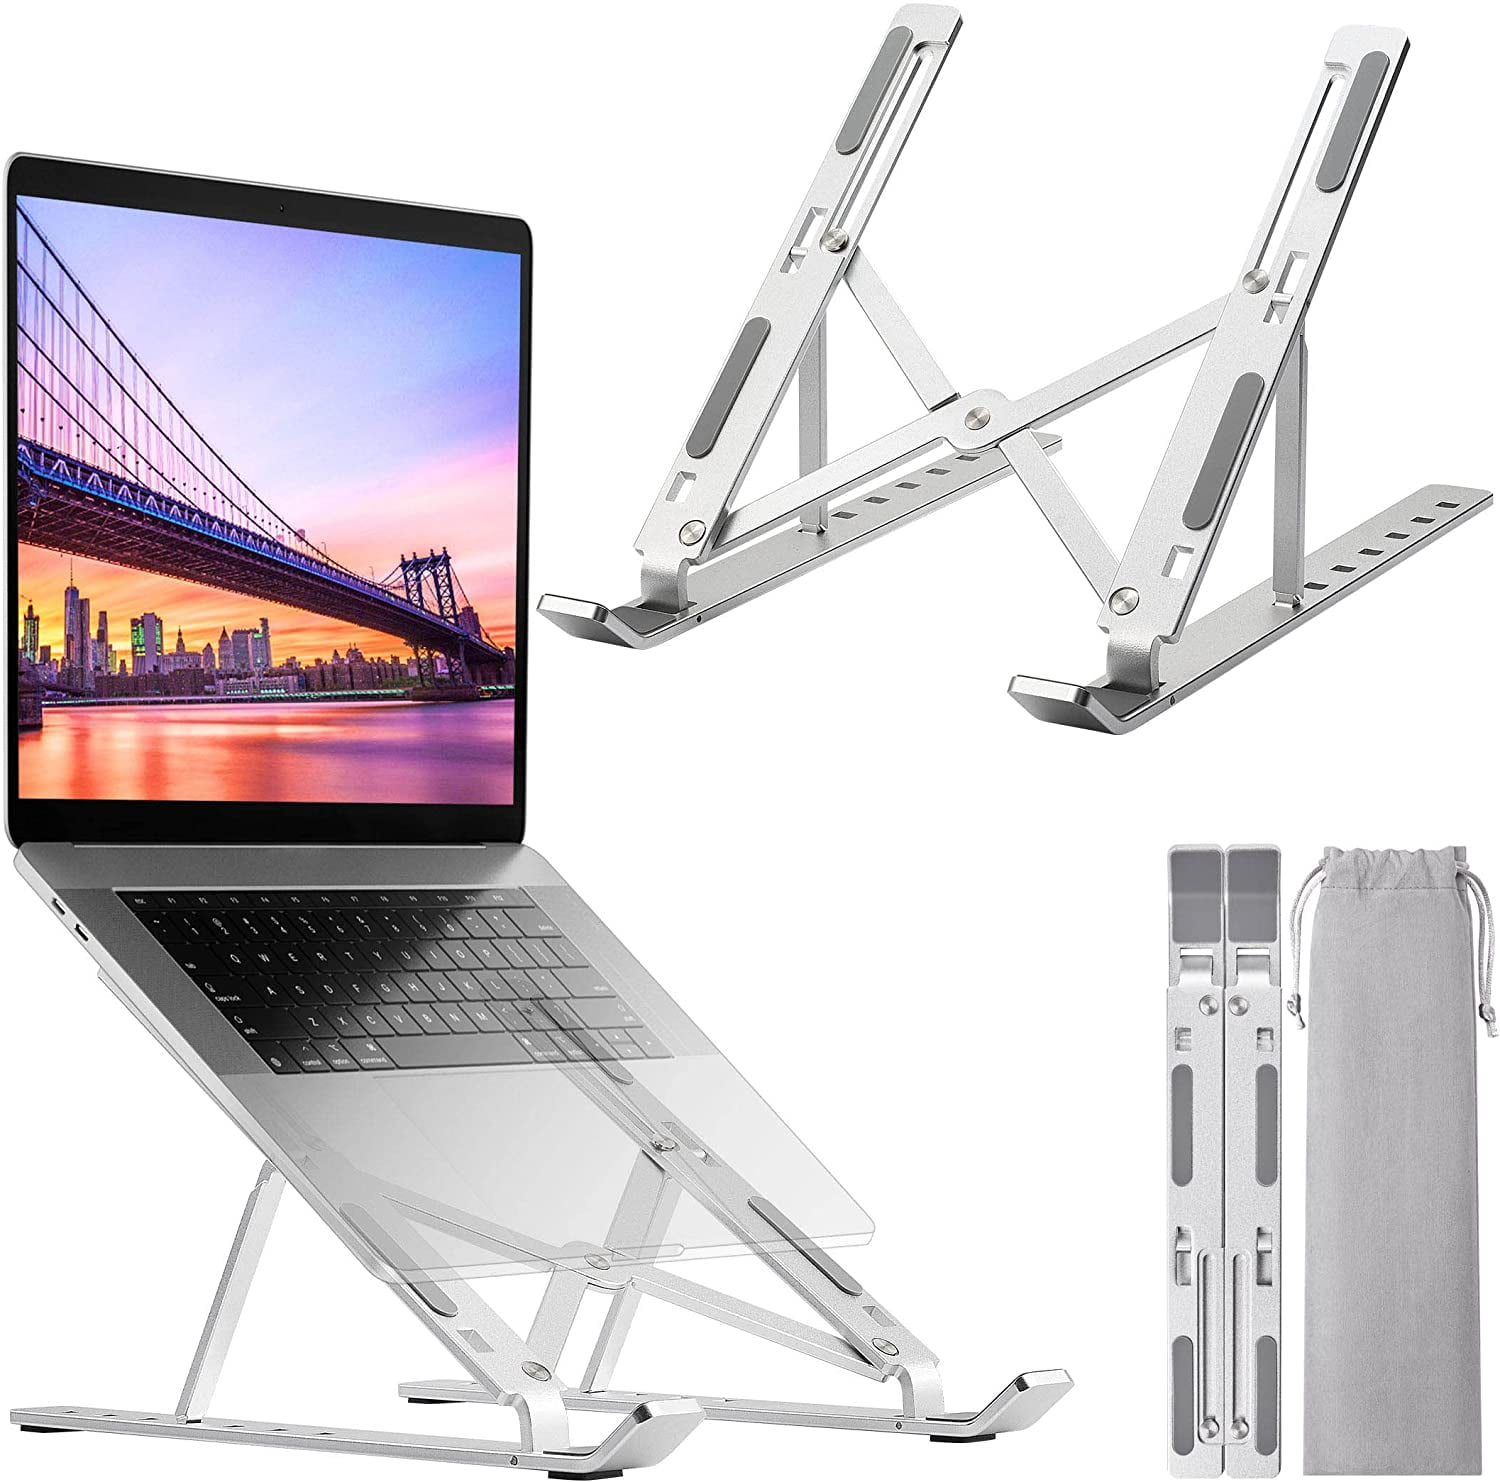 Portable Foldable Laptop Riser with 7 Angles Height Adjustment Non Slip Aluminum Laptop Mount Compatible with Multiple Brands 11”-17” Laptops Ventilated Desktop Laptop Holder Yoassi Laptop Stand 